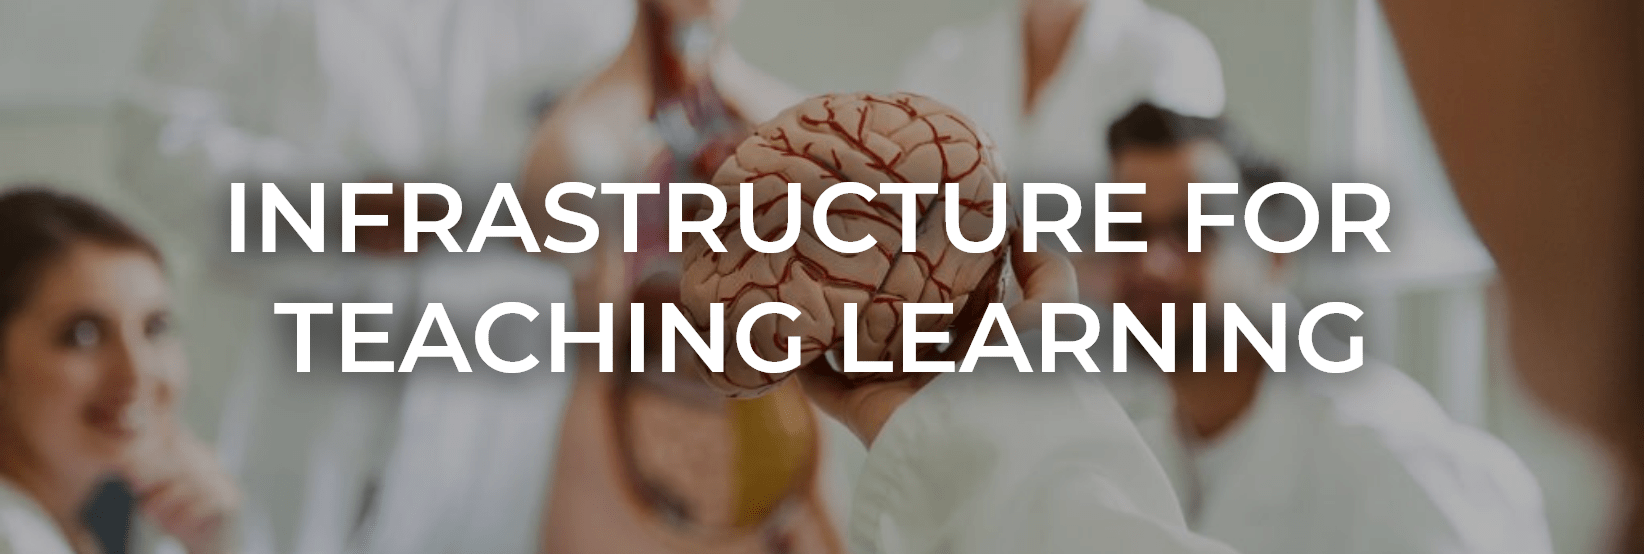 Infrastructure For Teaching Learning